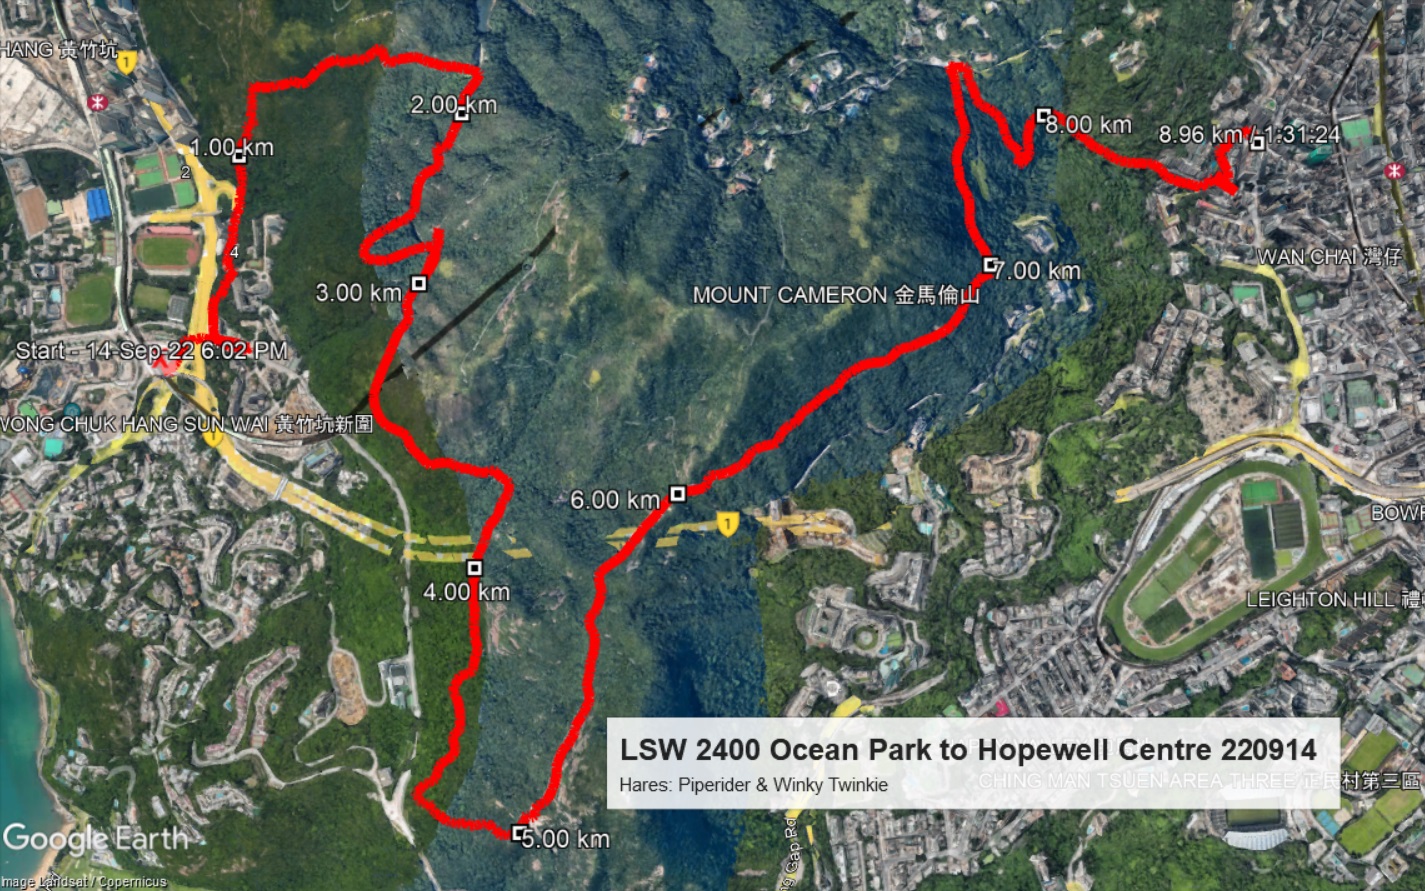 Ocean Park to Hopewell Centre 220914 8.96km